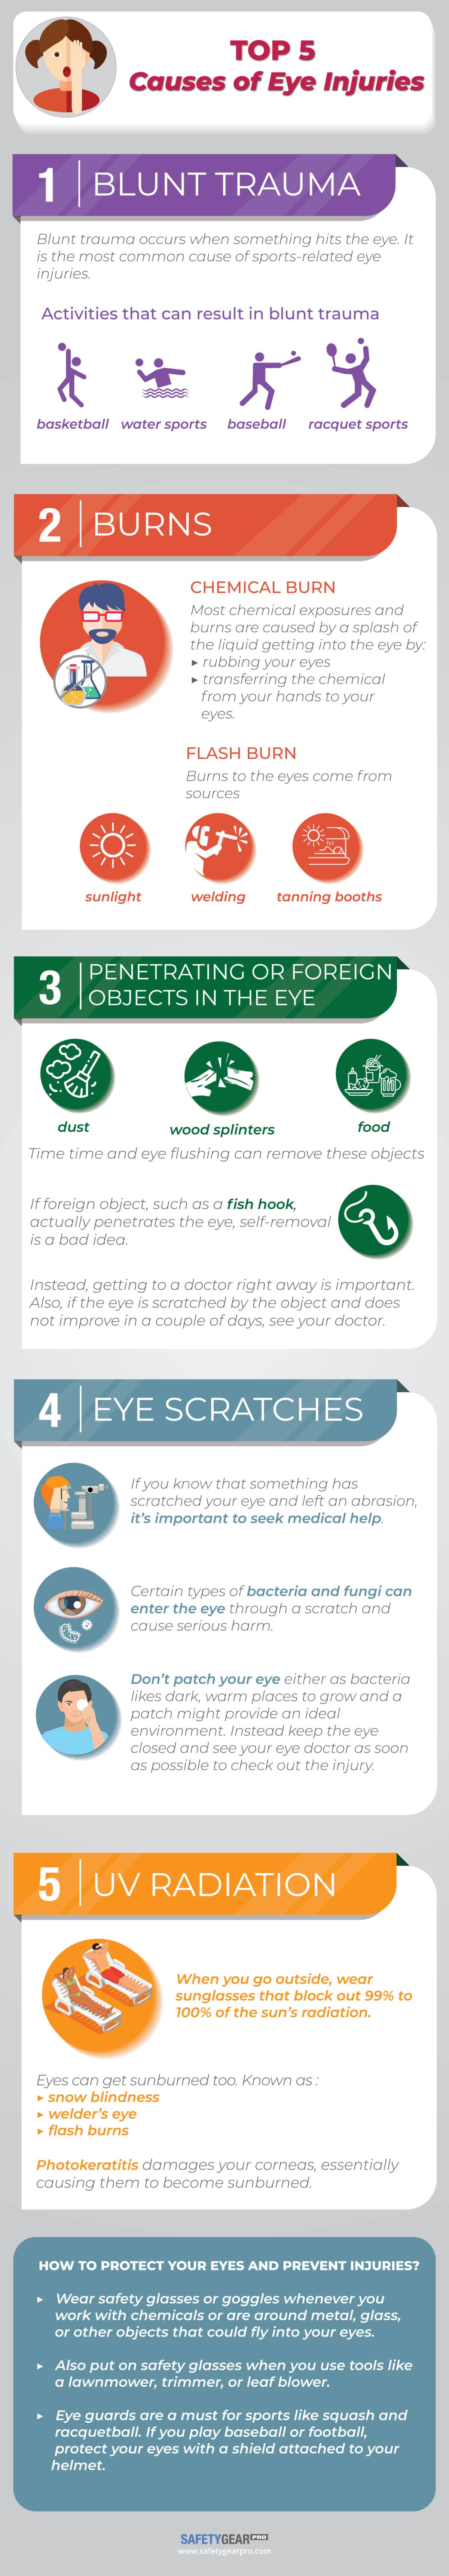 The Common Causes and Prevention of Eye Injuries Infographic